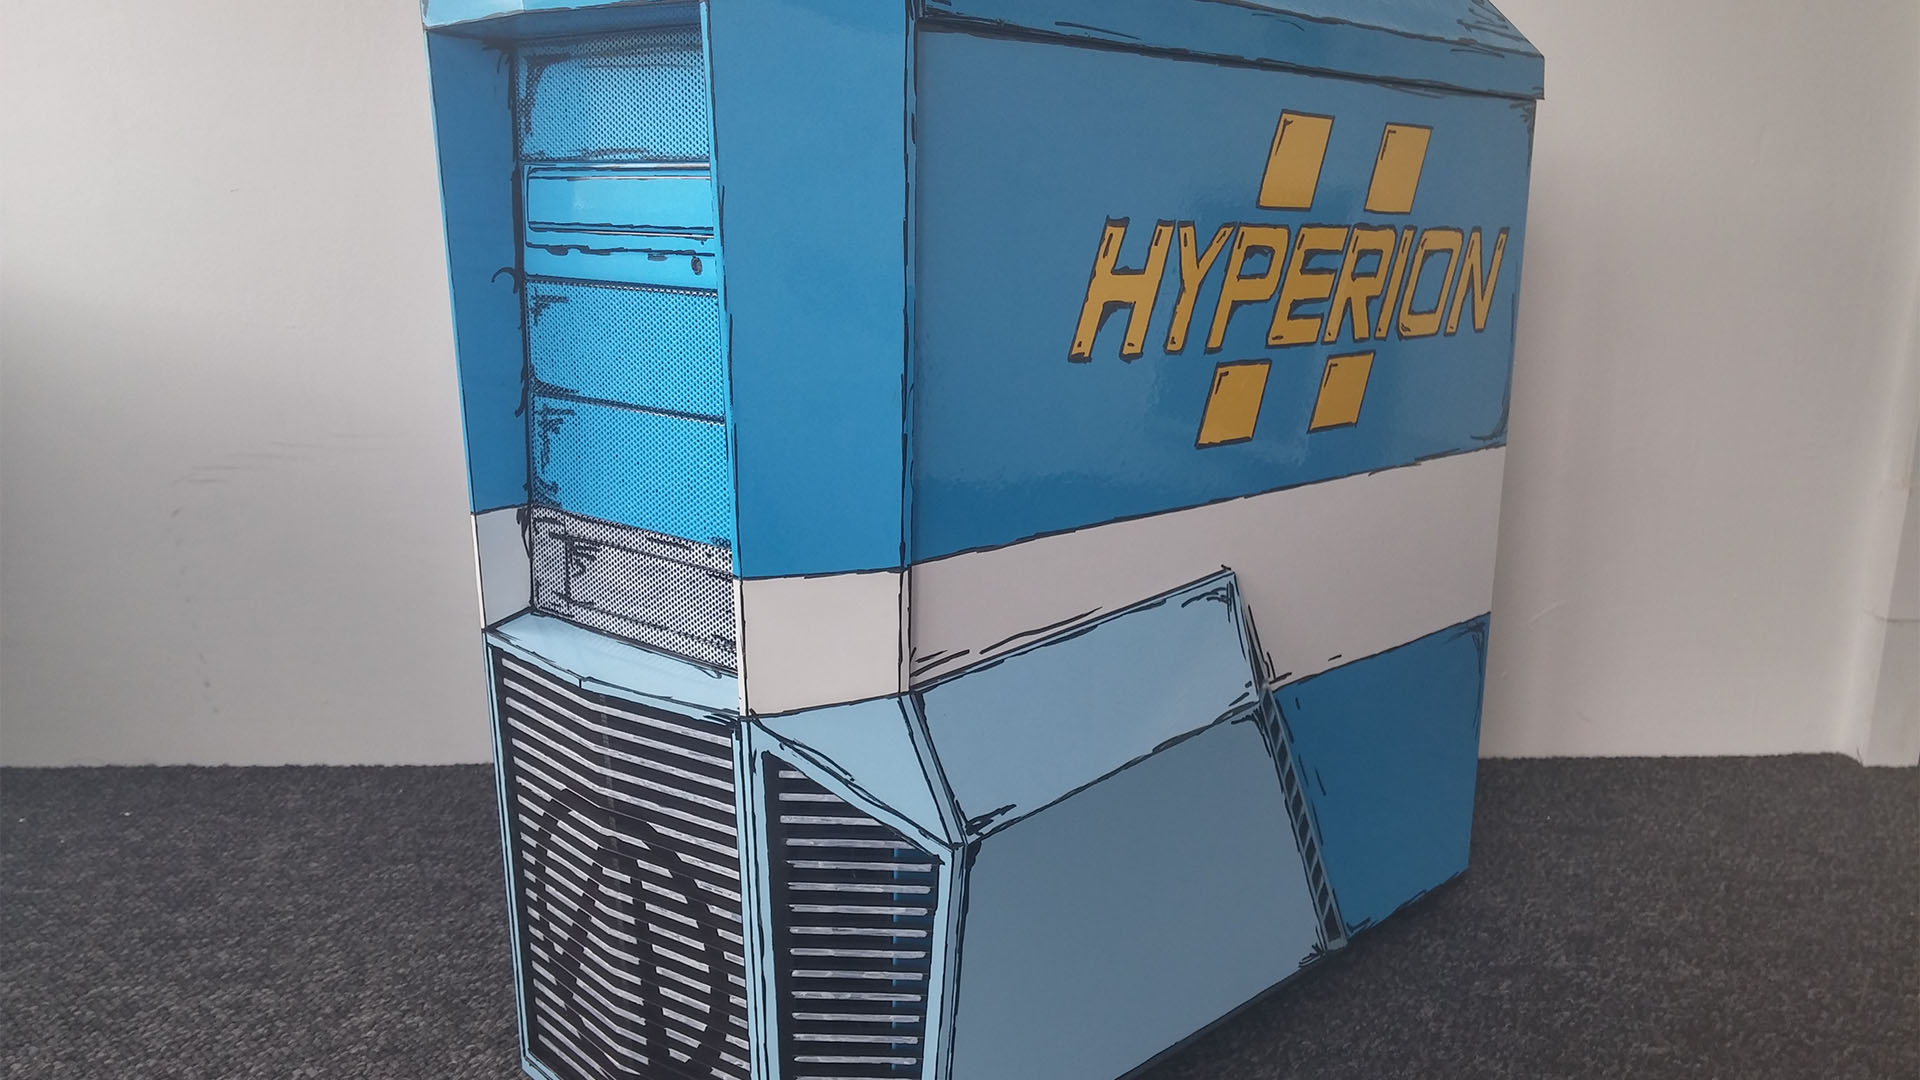 A Borderlands gaming PC build with vinyl wrapping used for the design